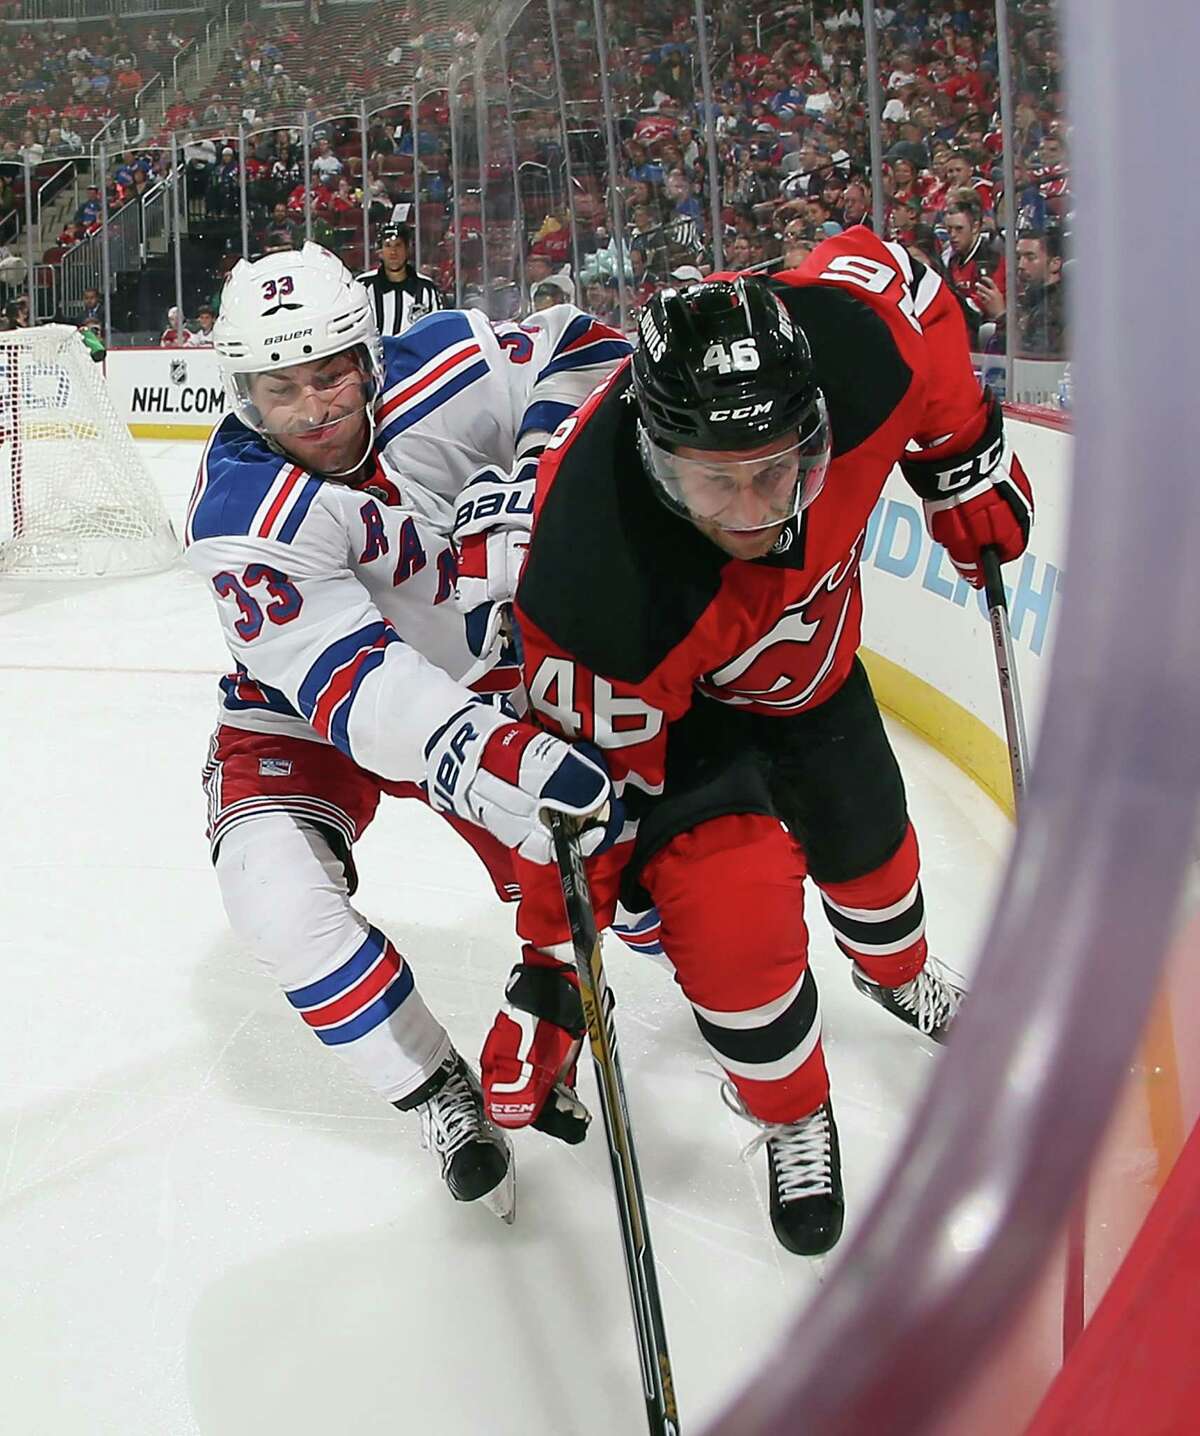 NEWARK, NJ - SEPTEMBER 26: Raphael Diaz #33 of the New York Rangers checks Mike Sislo #46 of the New Jersey Devils during the third period during a preseason game at the Prudential Center on September 26, 2015 in Newark, New Jersey. The Rangers defeated the Devils 4-3. (Photo by Bruce Bennett/Getty Images) ORG XMIT: 573904109